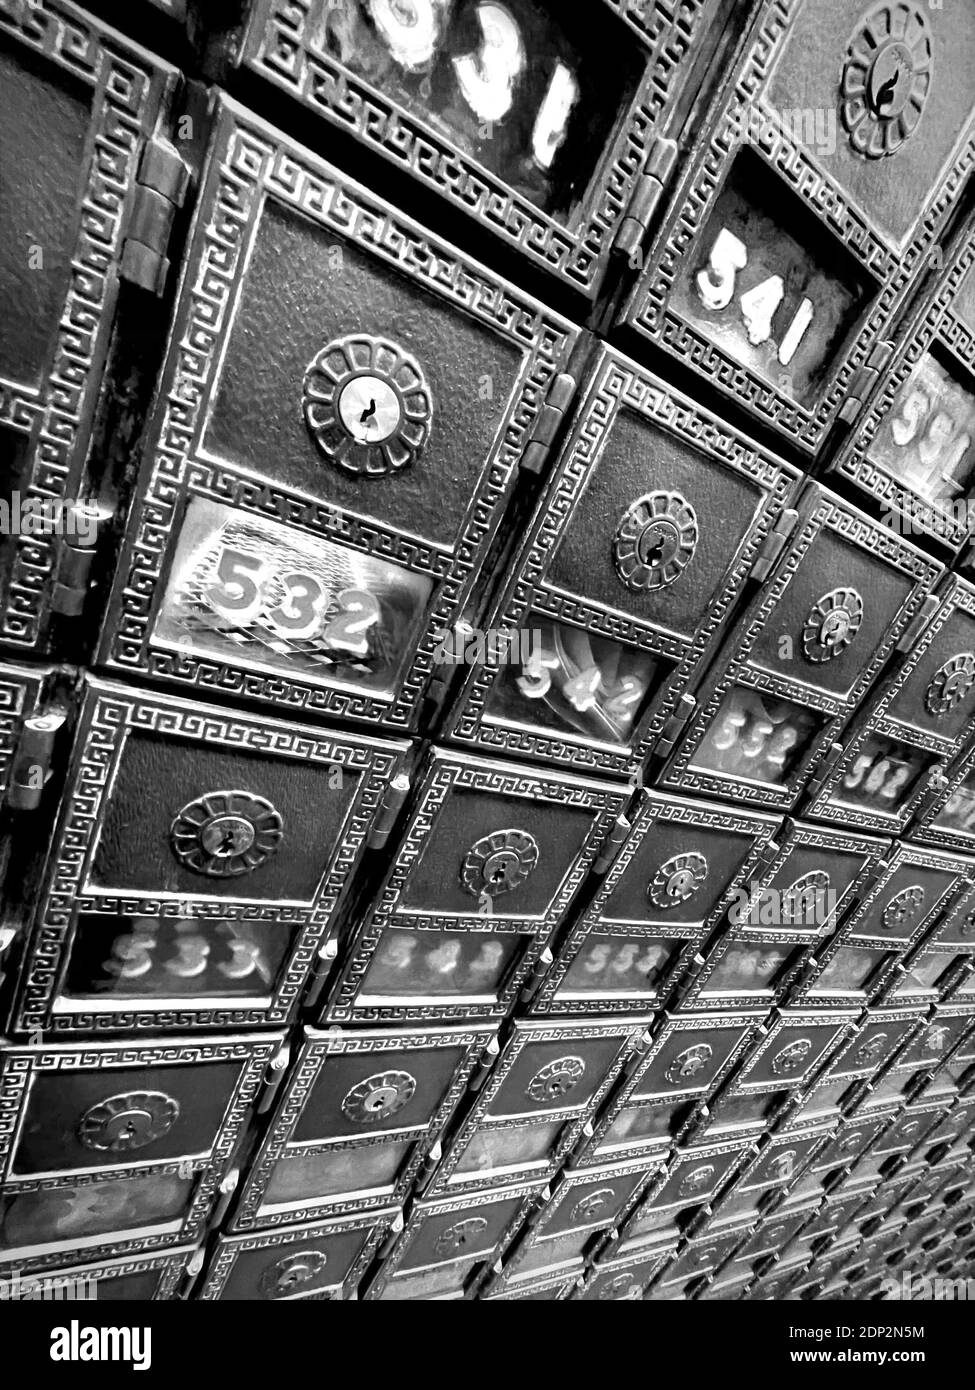 Post Office Boxes in the old Post Office in New York City.  Very dramatic angle with wide angle lens, making for a vanishing point perspective. Stock Photo